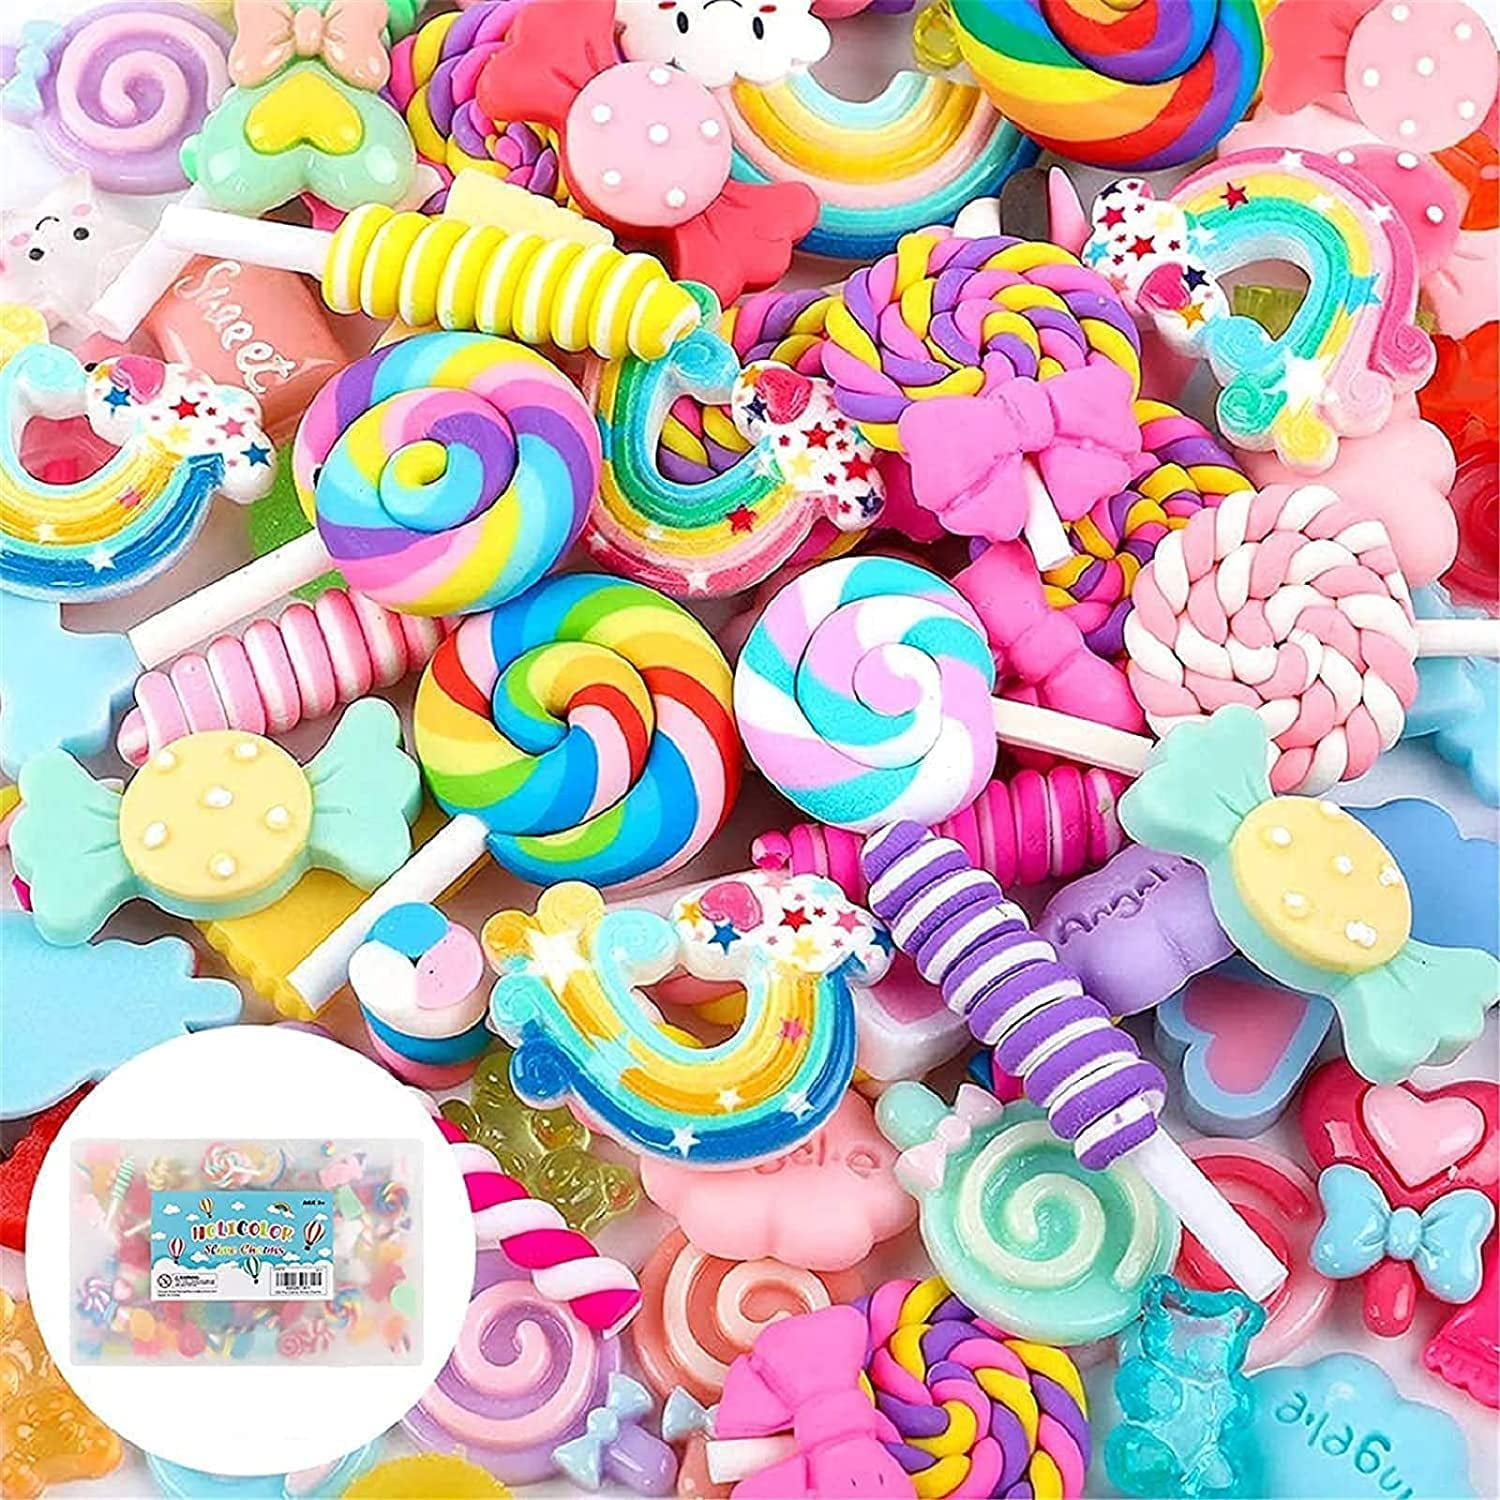 Mixed Lot Assorted Cartoons Flowers Resin Flatback Cute Sets for DIY Crafts Making,Decorations,Scrapbooking,Embellishments,Hair Clip 25pcs Slime Charms Cartoons Flowers Cute Set 